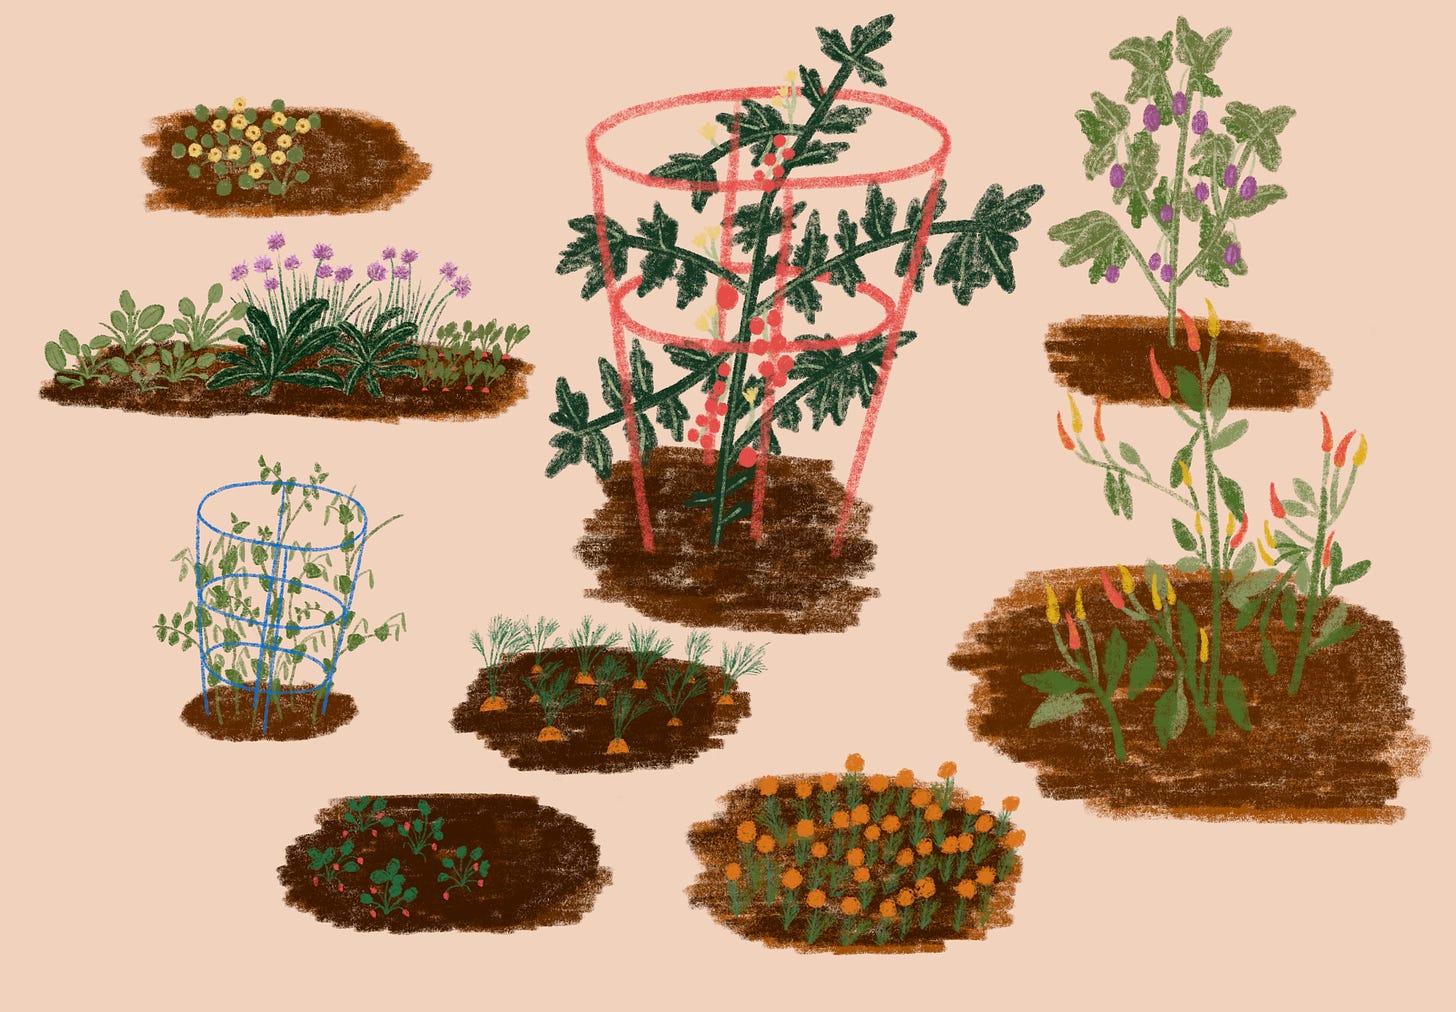 a blooming garden! there are green nasturtiums with yellow flowers, spinach, kale, chives, snap peas, small red strawberries, orange carrots and green carrot tops, orange marigols, red tomatoes in a red tomato helper, red and yellow chilis and small purple eggplants